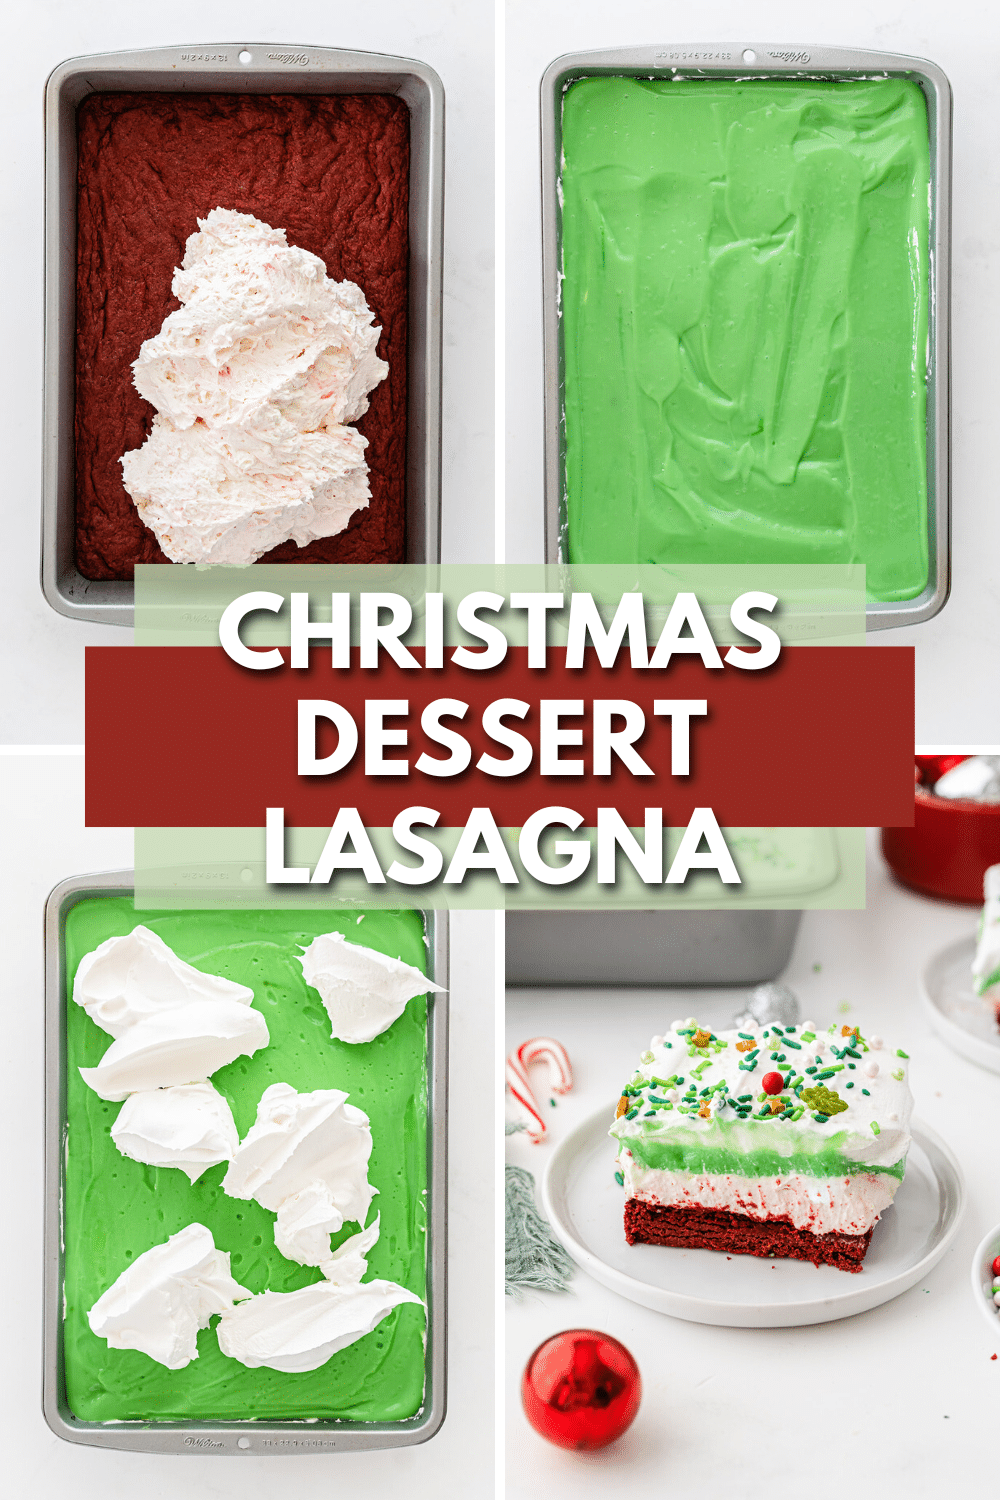 Christmas dessert lasagne in a pan. Indulge in the festive delight of Christmas Dessert Lasagna, baked to perfection and served in a delightful pan.